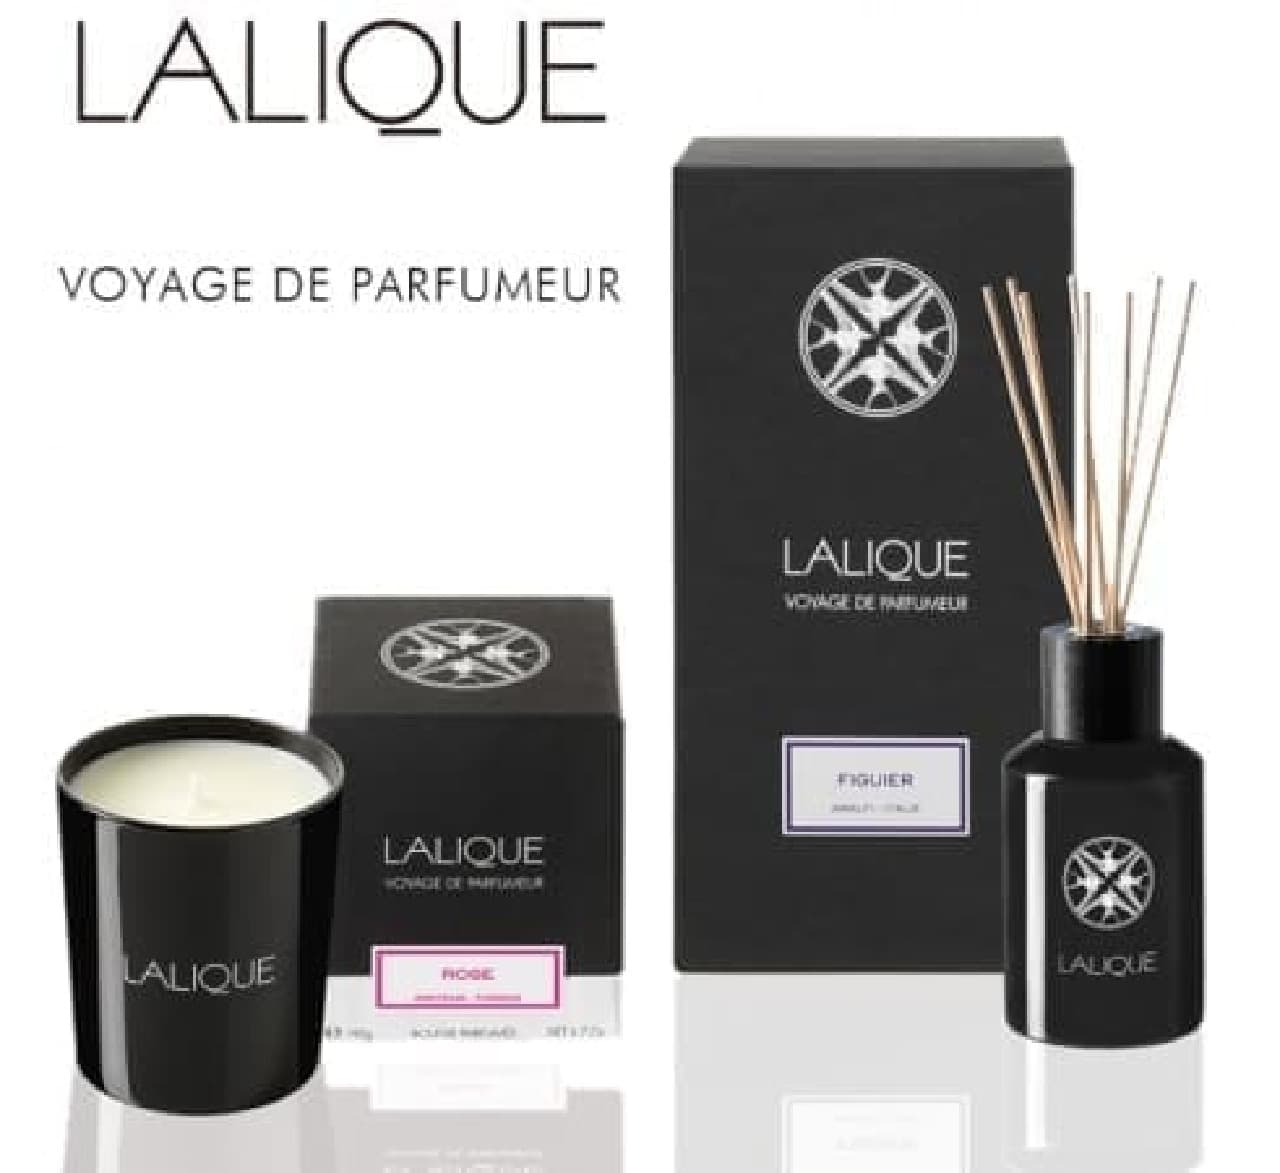 Laric's home fragrance landed for the first time in Japan